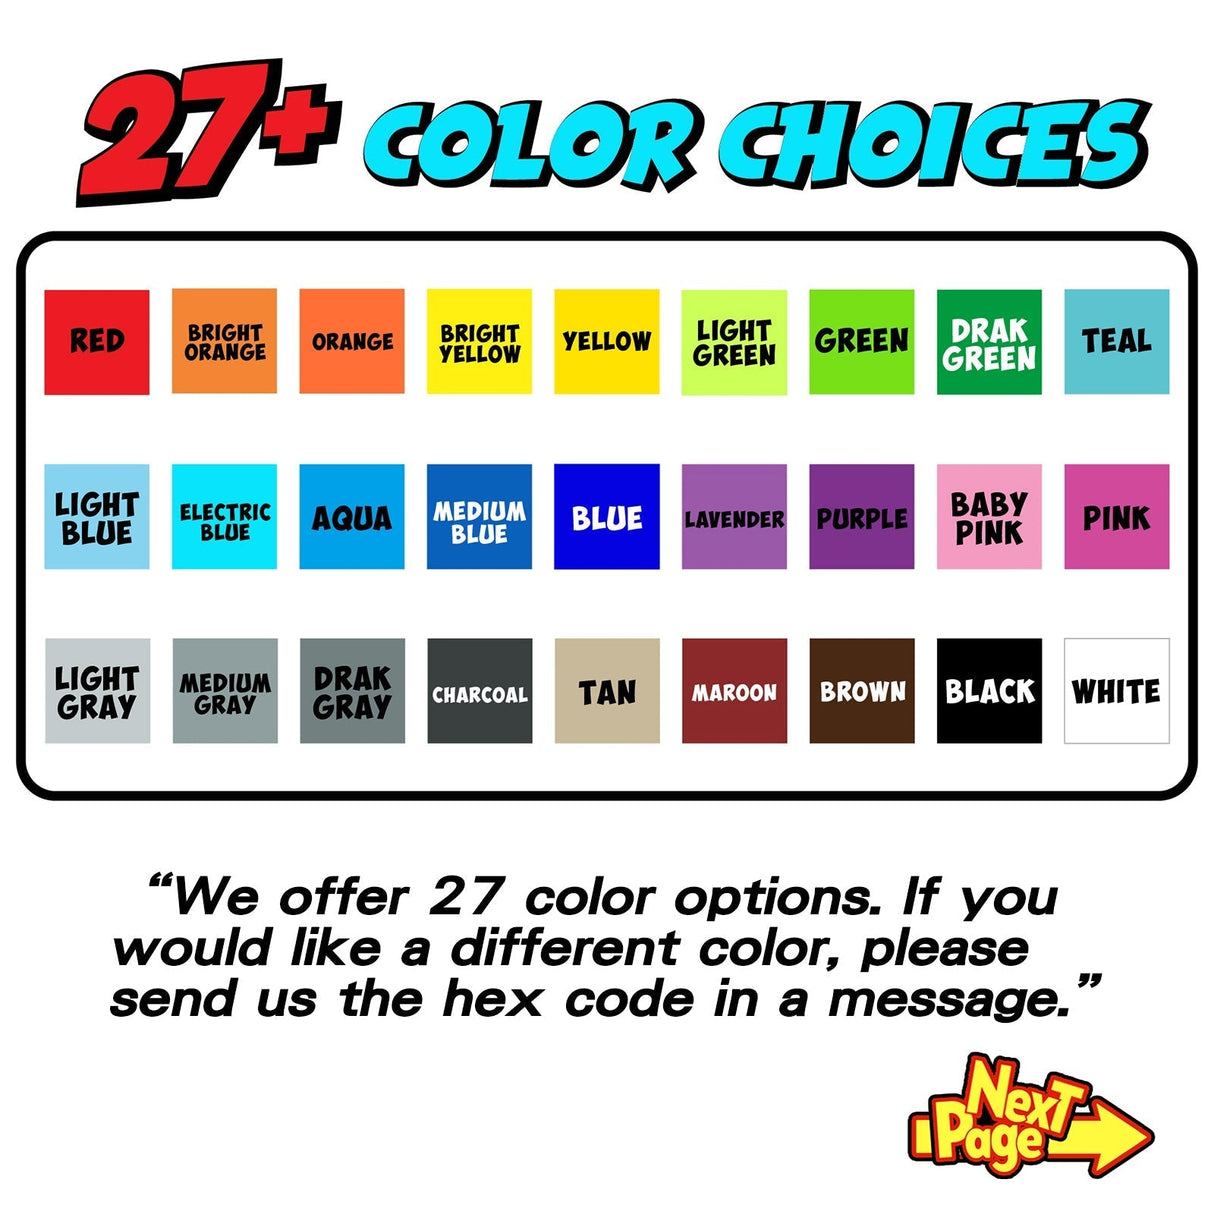 We provide a wide range of color options, with a selection of 27 hues including popular choices such as red, orange, yellow, green, blue, purple, and pink.